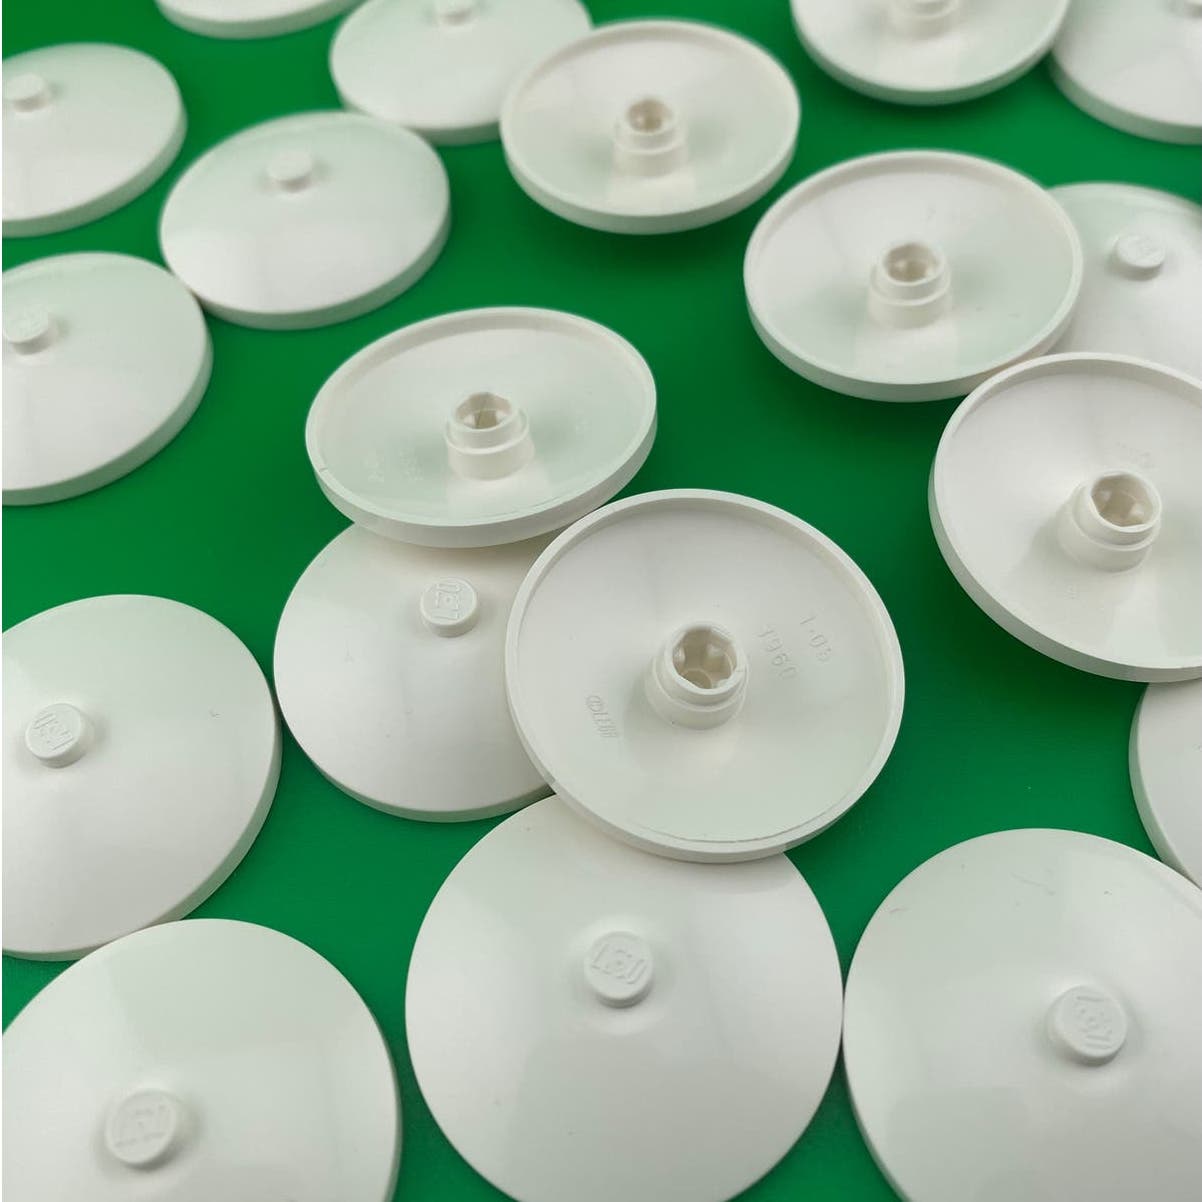 100 Pcs Lego Round White Specialty Plate 2x2  1.25" Dia x .25 High  A490